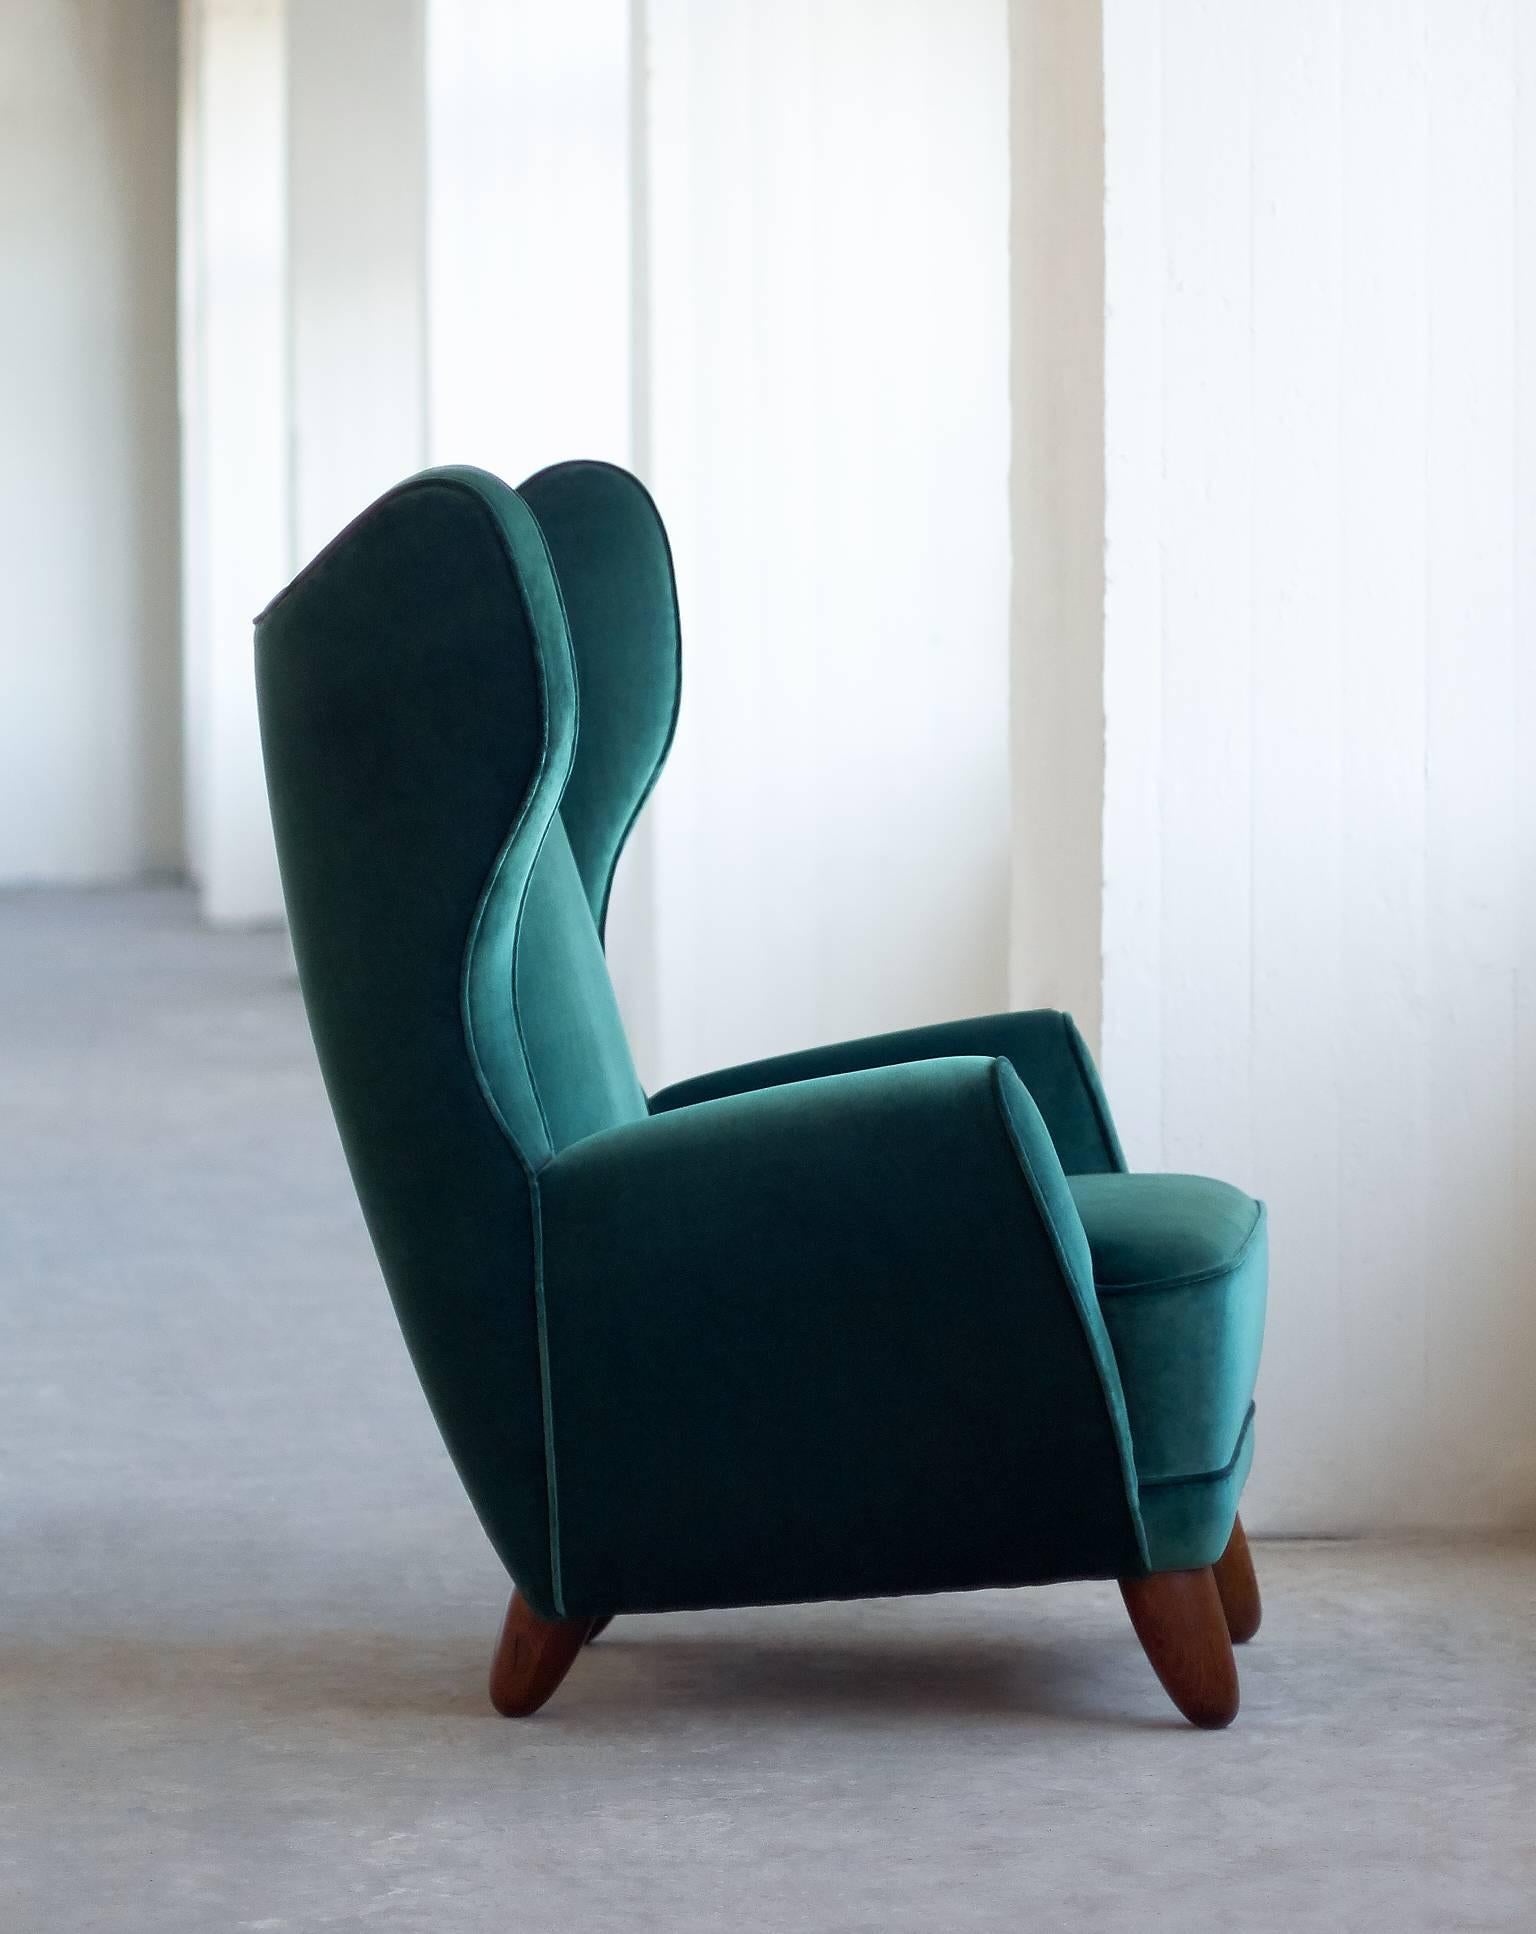 Exceptional 1940s Wingback Chair Attributed to Guglielmo Ulrich 3